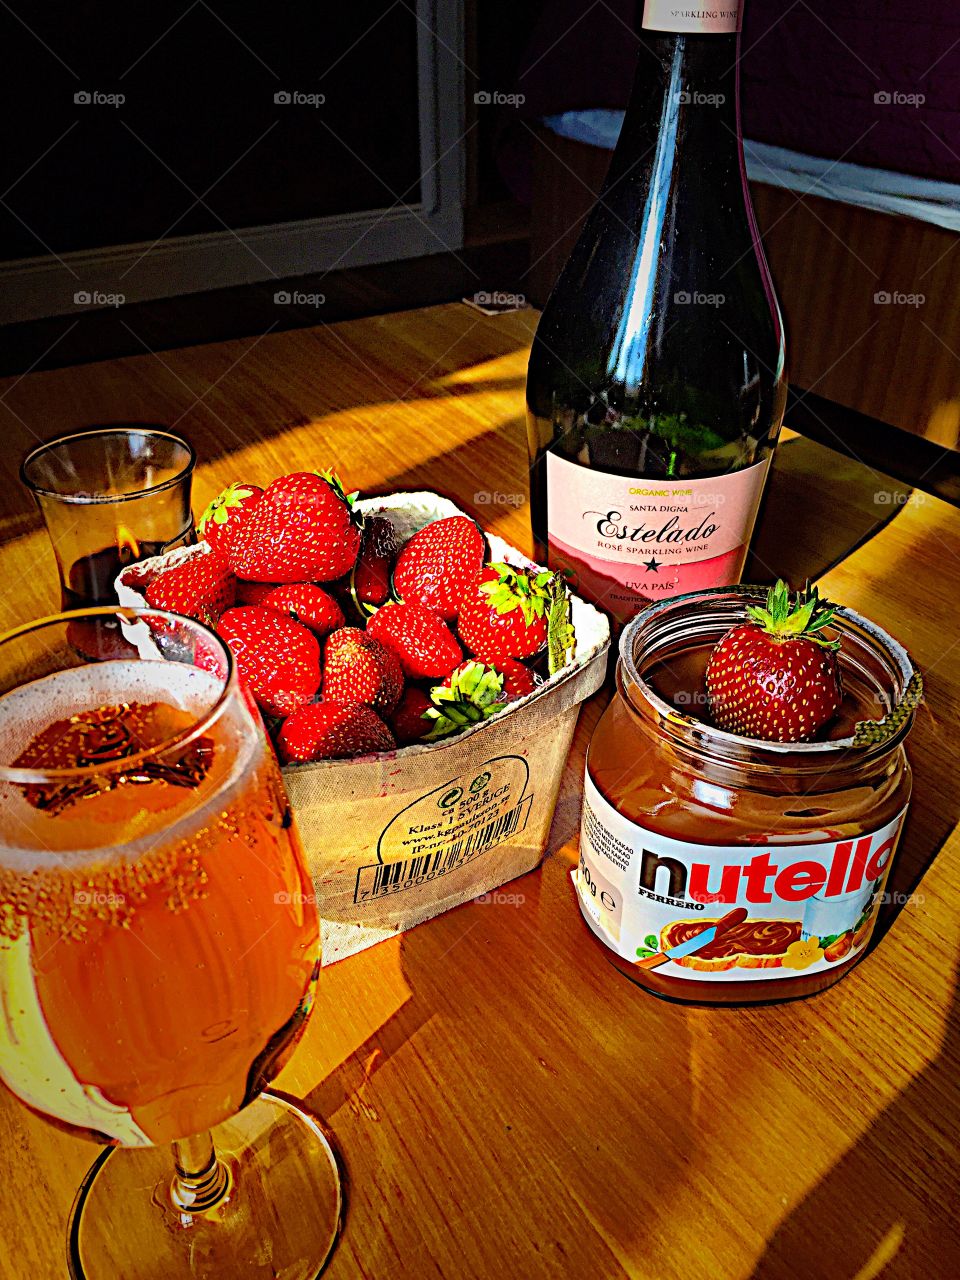 Delicious strawberries with nutella and sparkling win! 